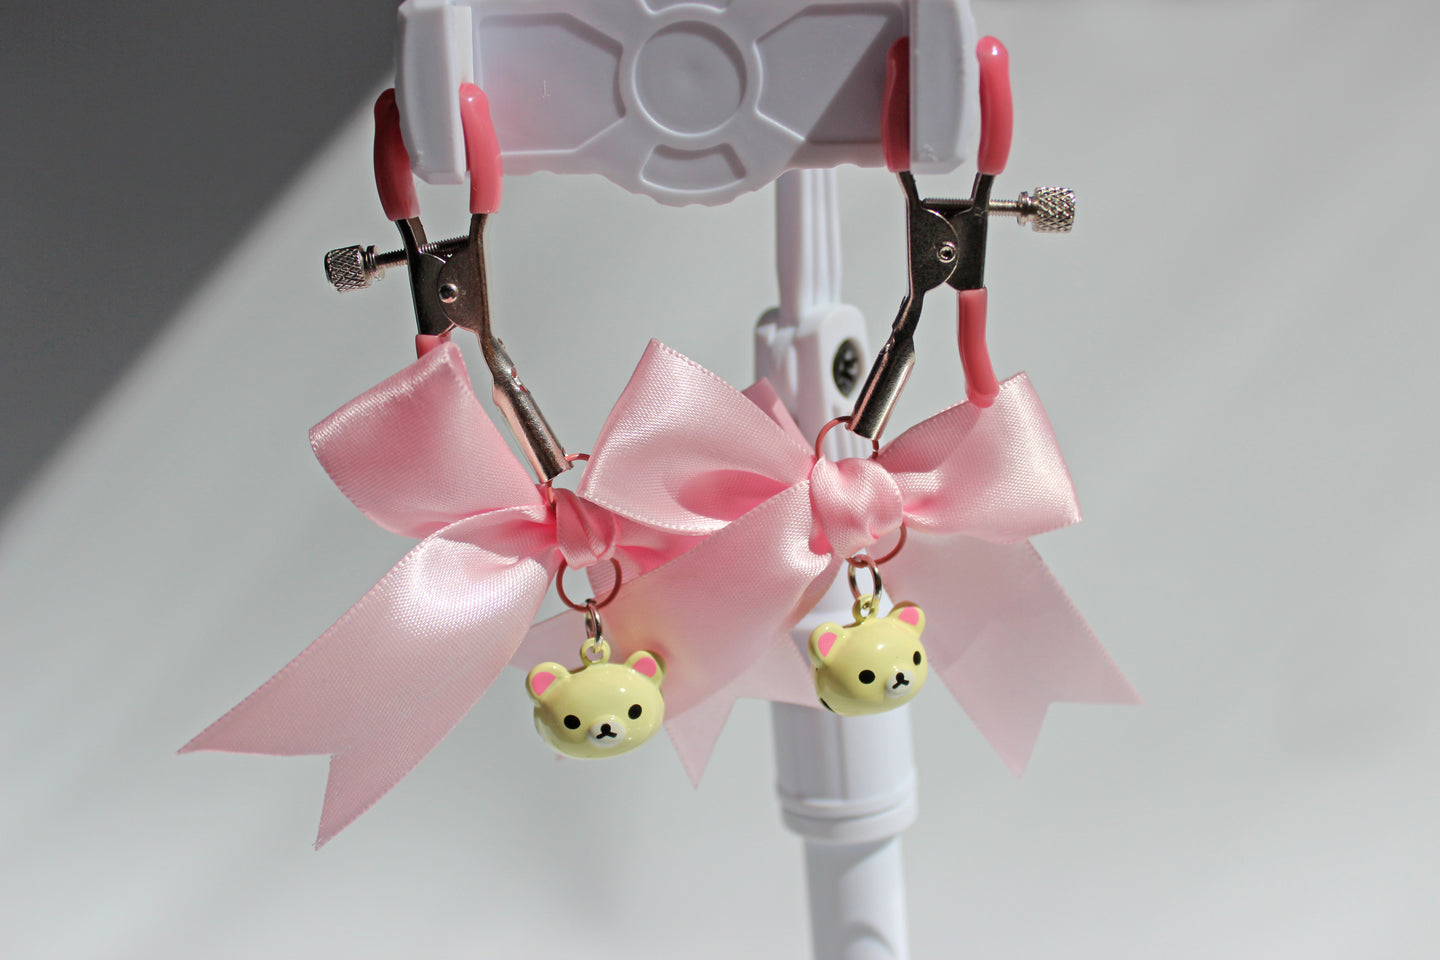 Silver nipple clamps with pink pvc caps and adjustable tension screw and pink bows and white bear heads hanging off the clamps being held up on a white background.